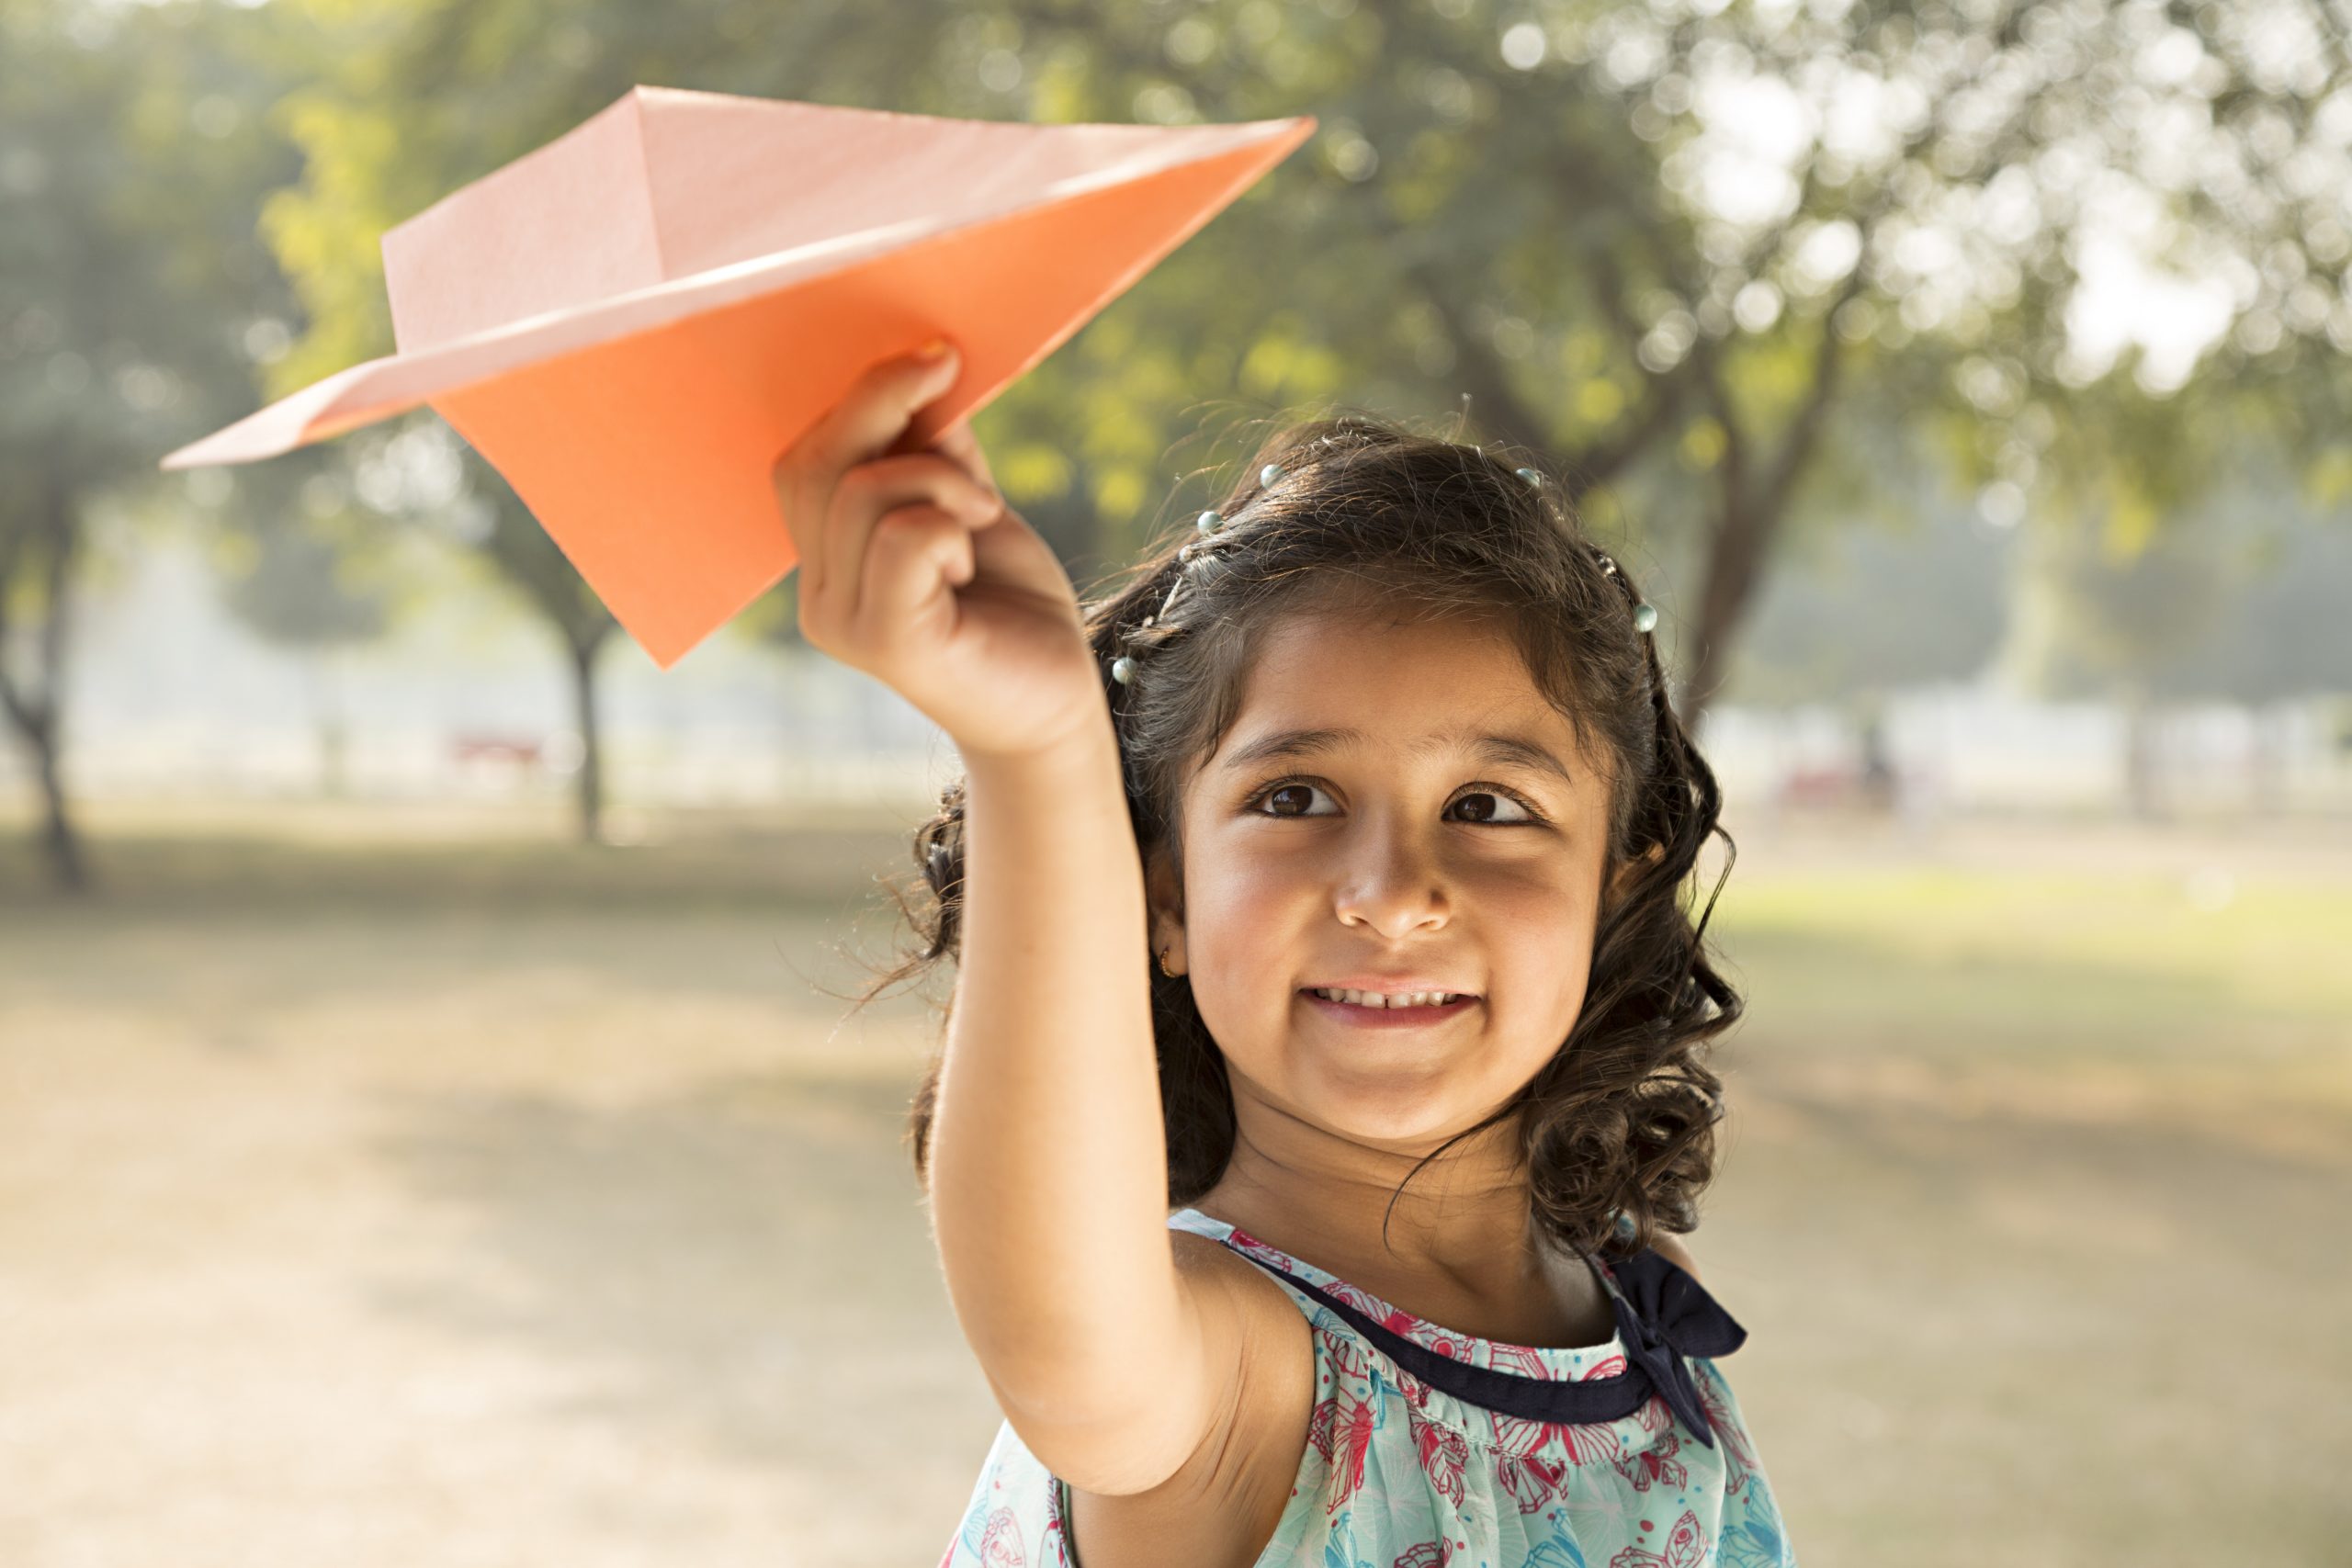 Girl playing with paper airplane